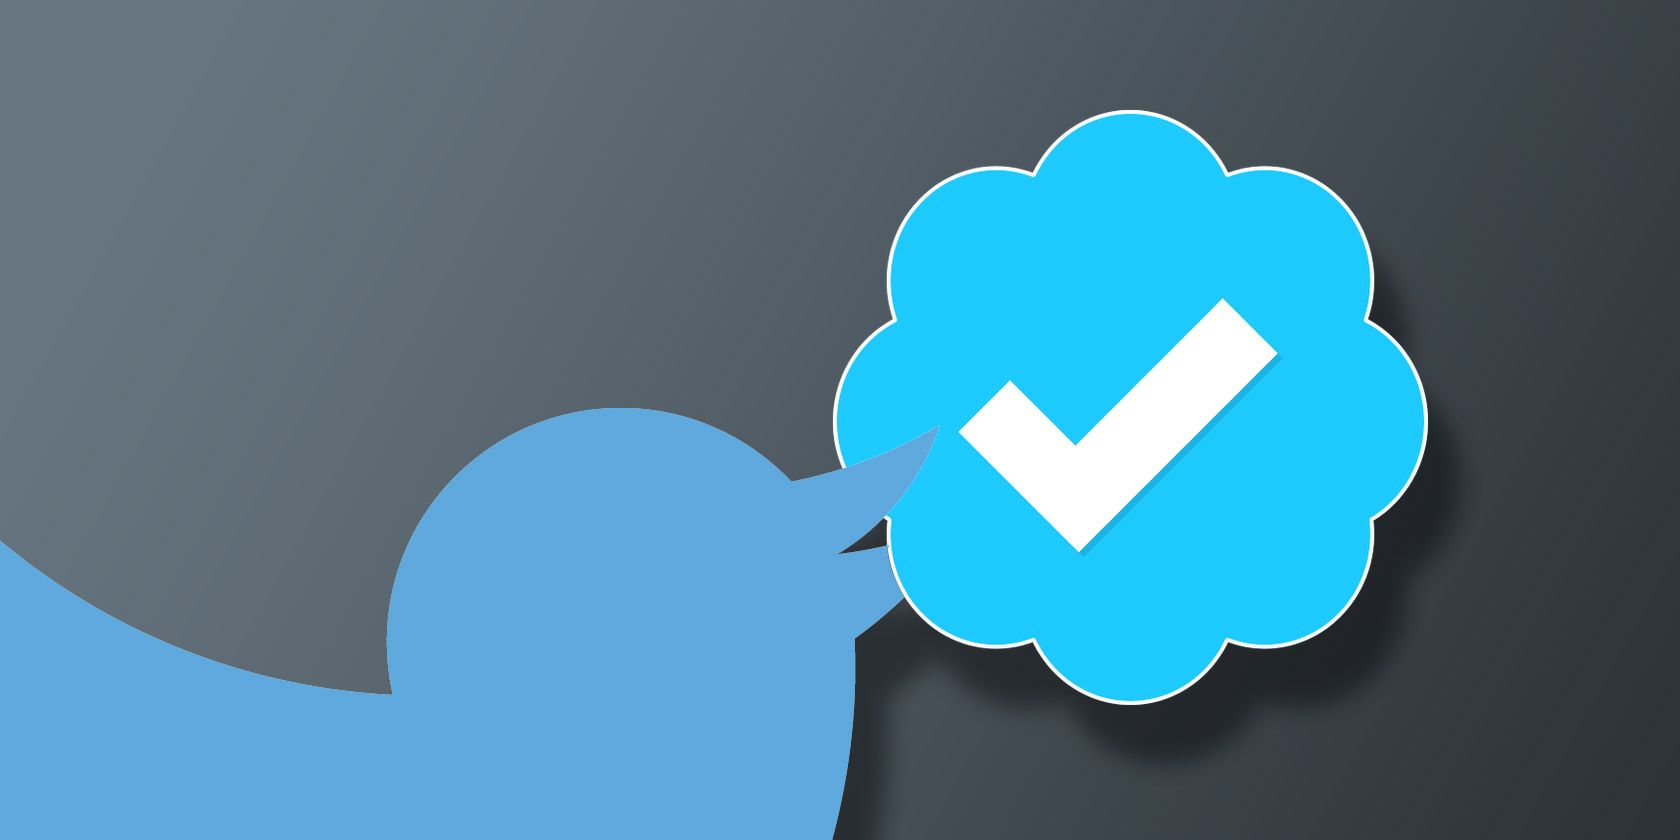 How to Get a Verified Account on Twitter (And Is It Worth It?)